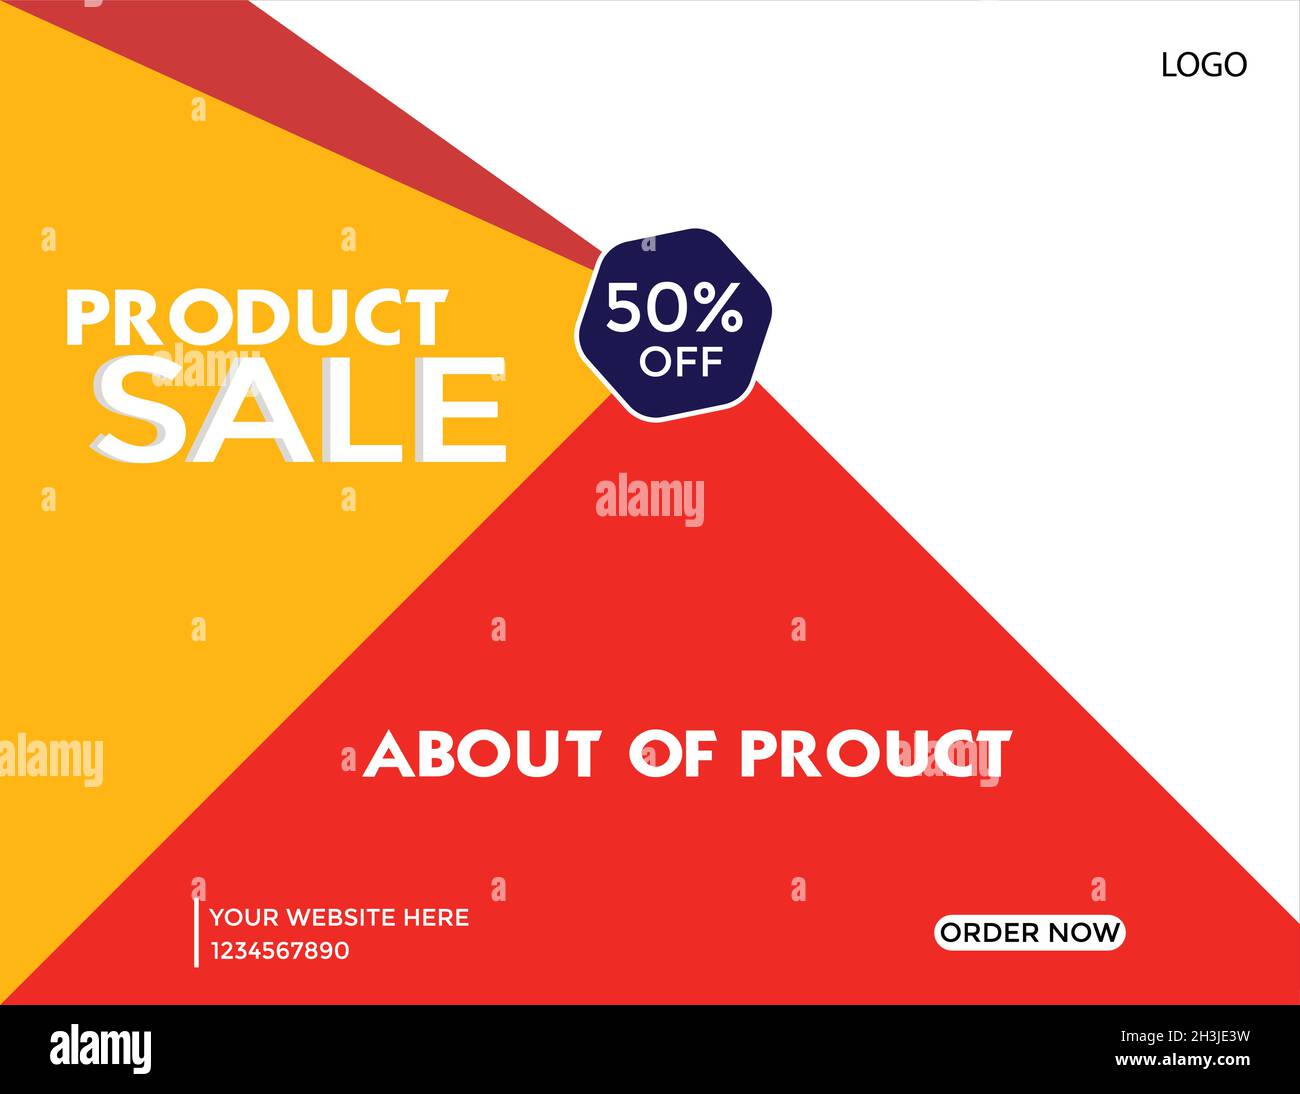 Product sales flyer template vector Stock Vector